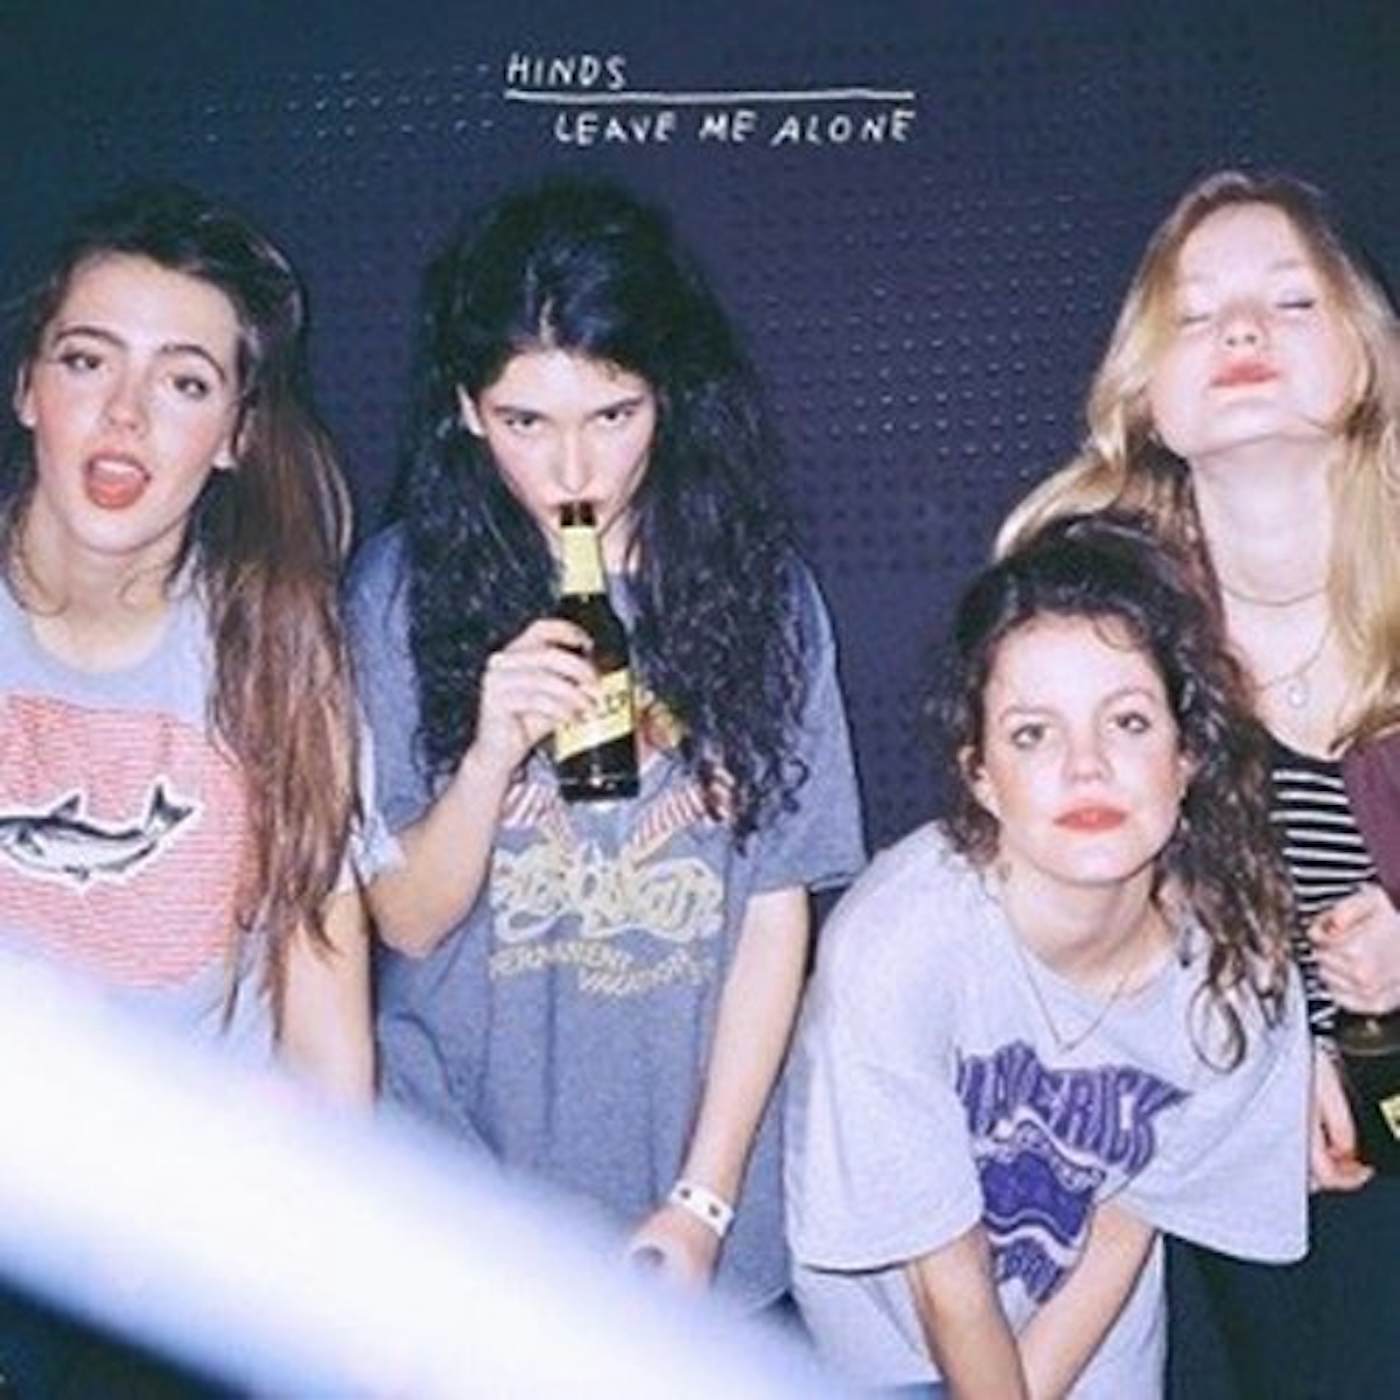 Hinds LEAVE ME ALONE: LIMITED Vinyl Record